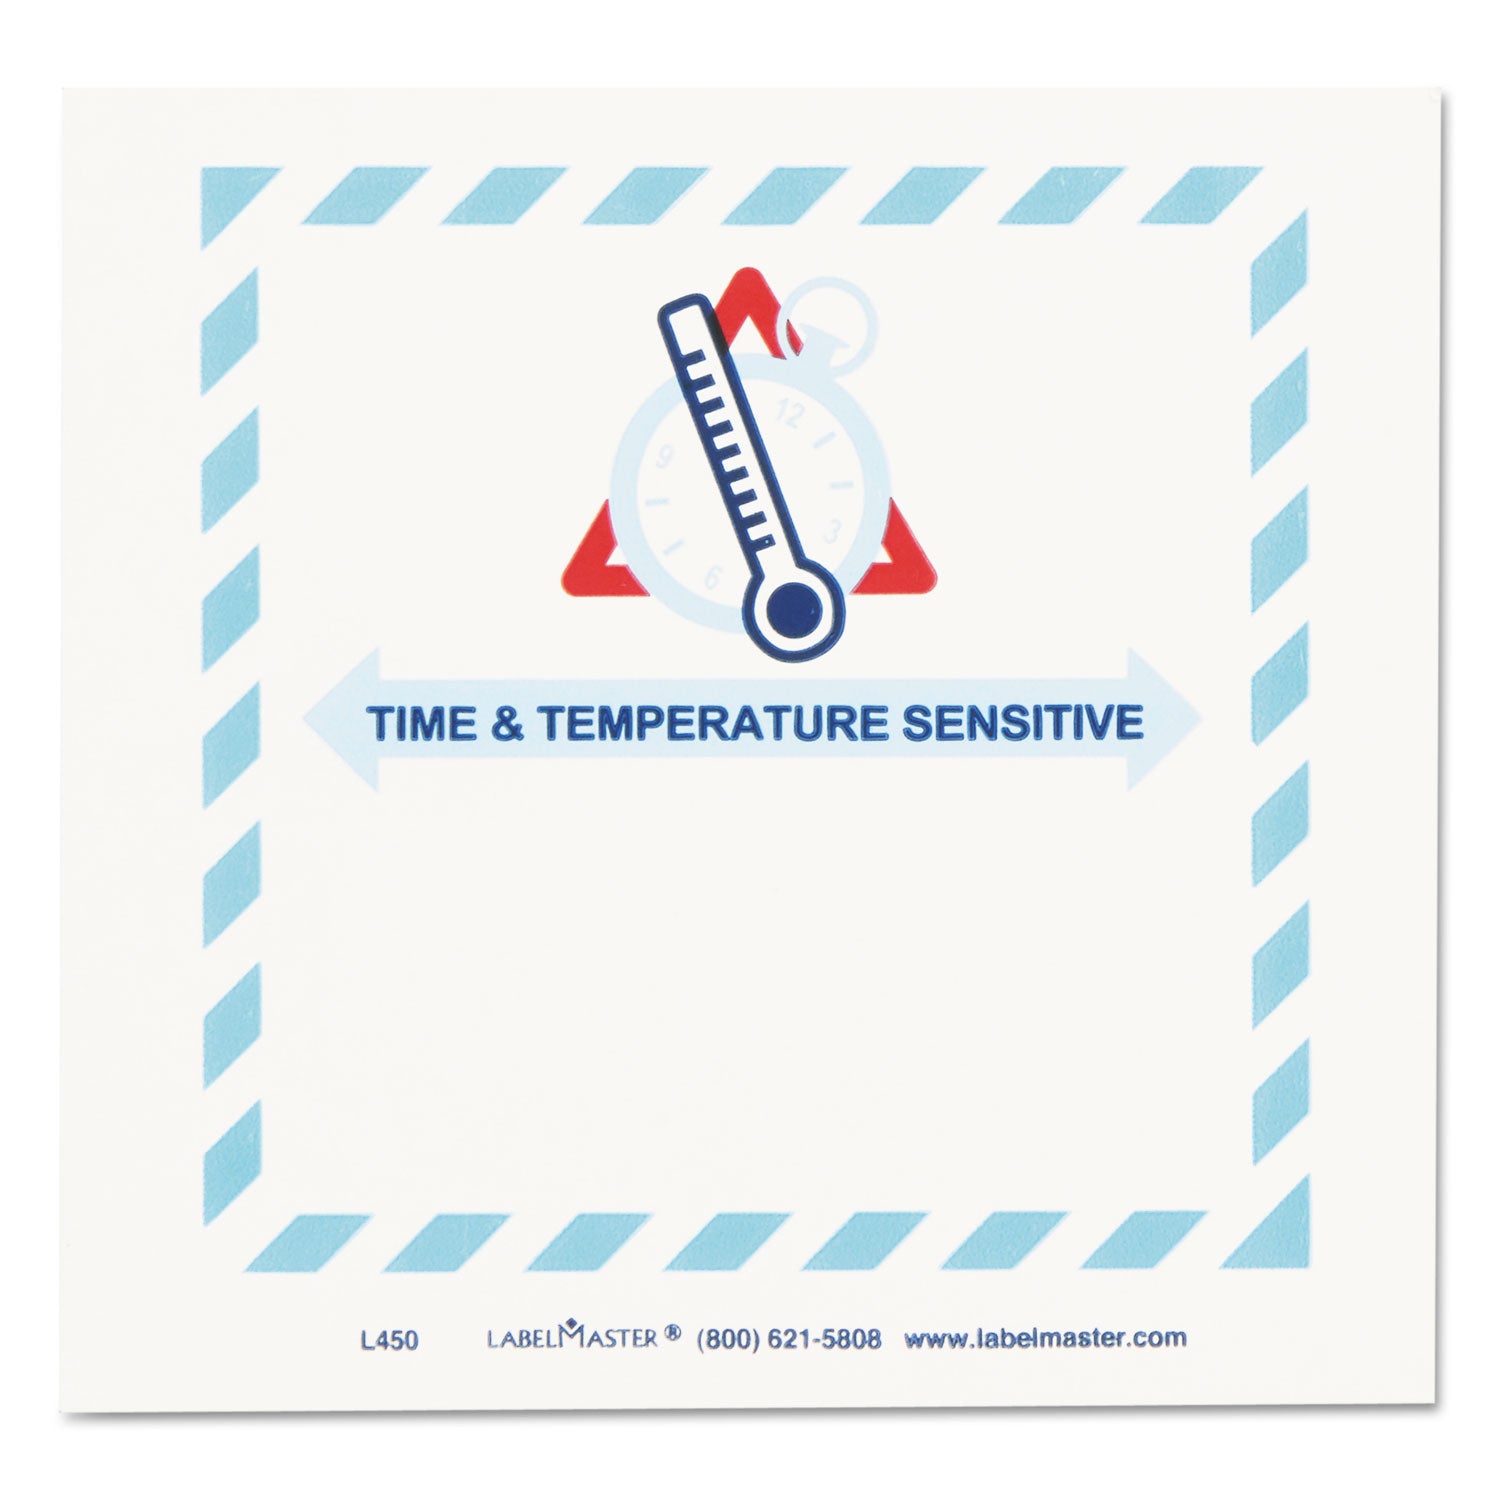 Shipping and Handling Self-Adhesive Labels, TIME and TEMPERATURE SENSITIVE, 5.5 x 5, Blue/Gray/Red/White, 500/Roll - 